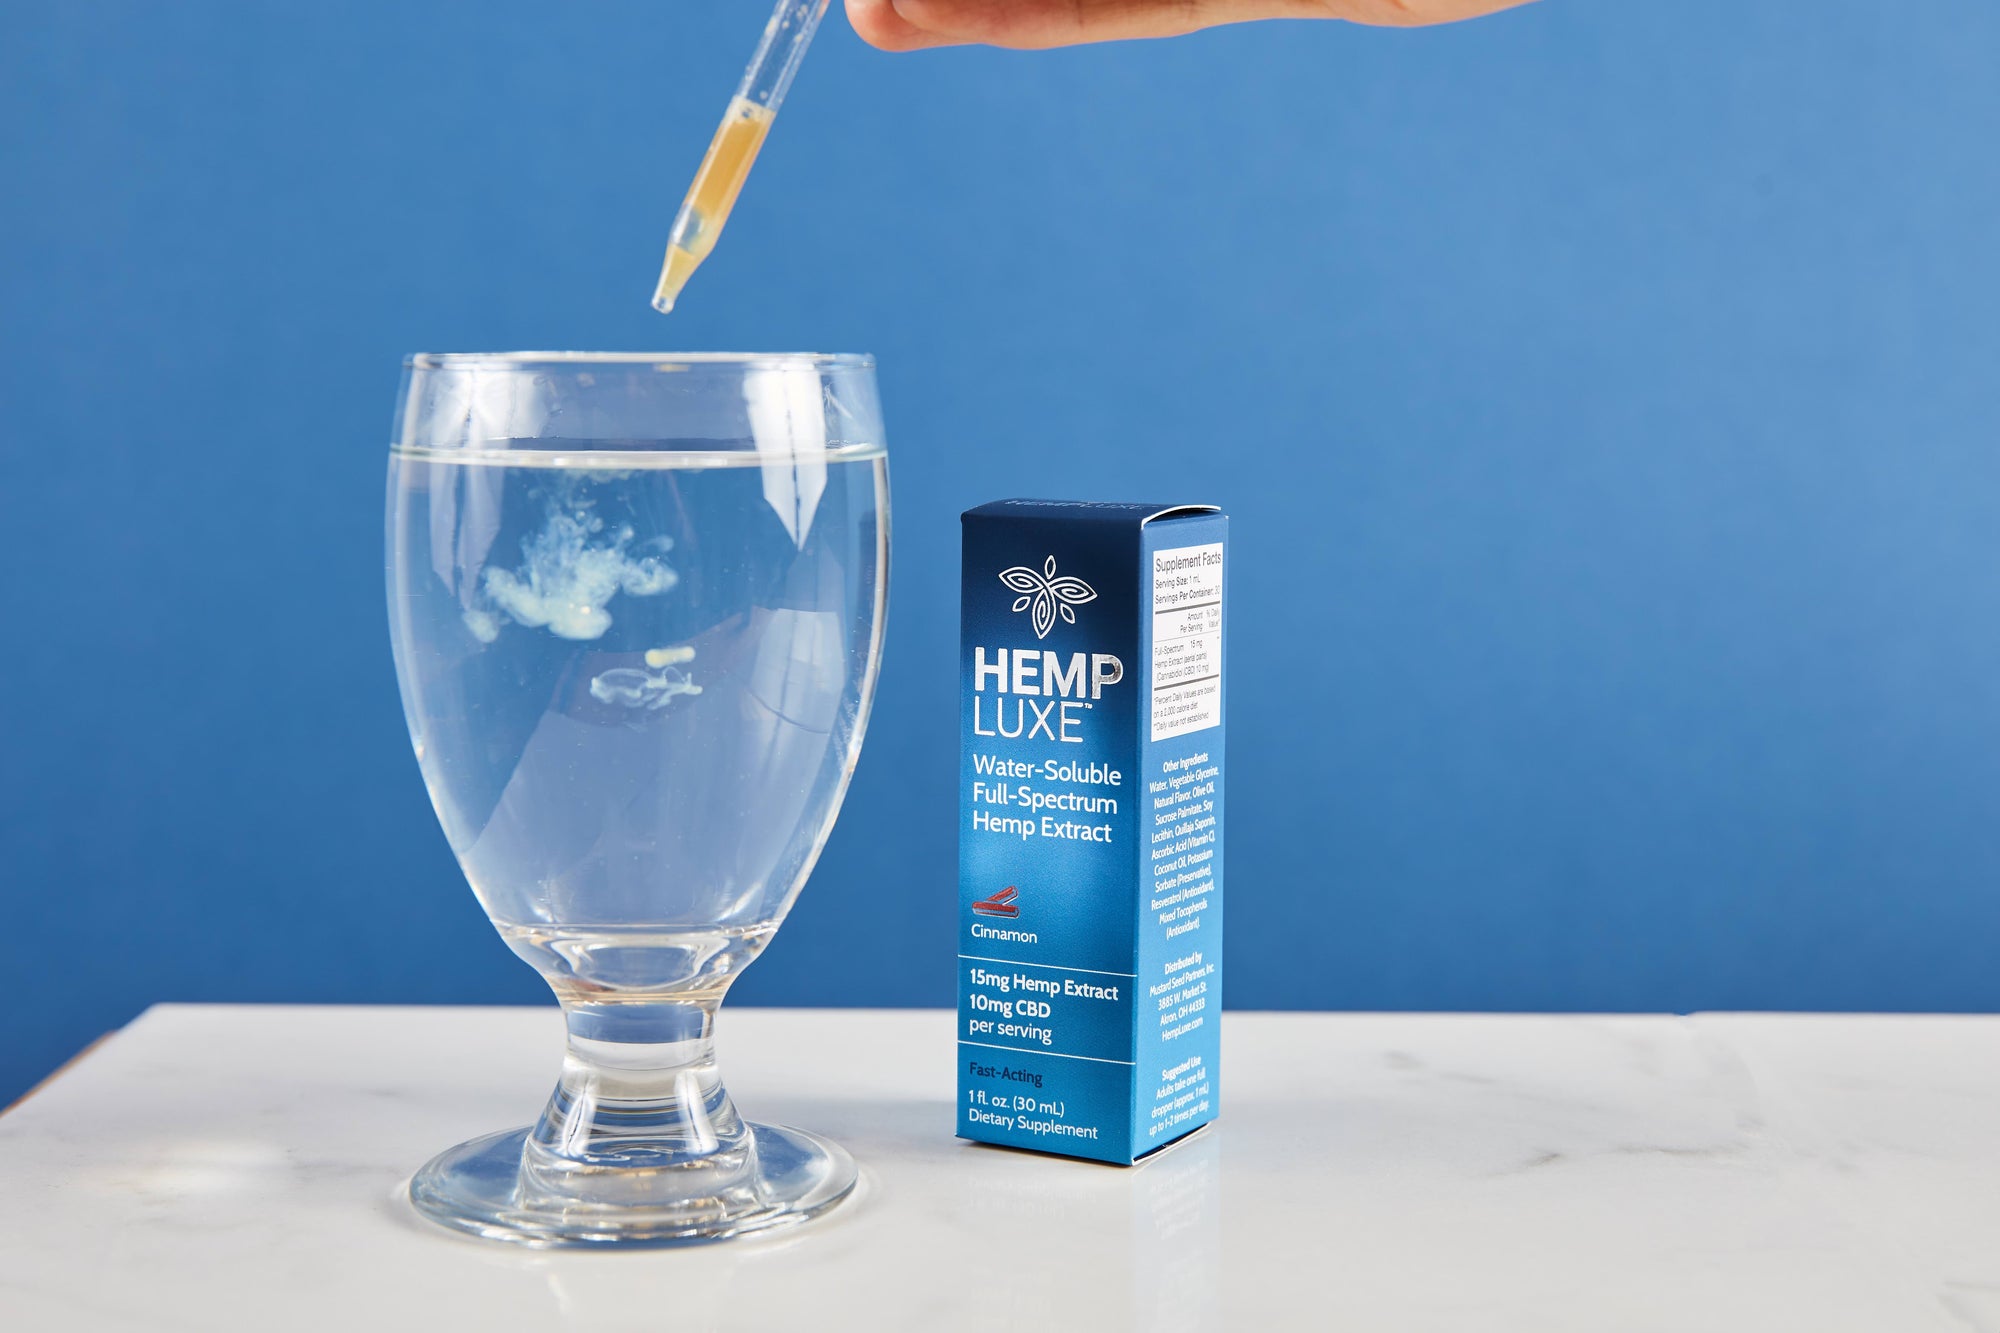 Water-Soluble CBD 101: The difference between oil-based and water-soluble CBD